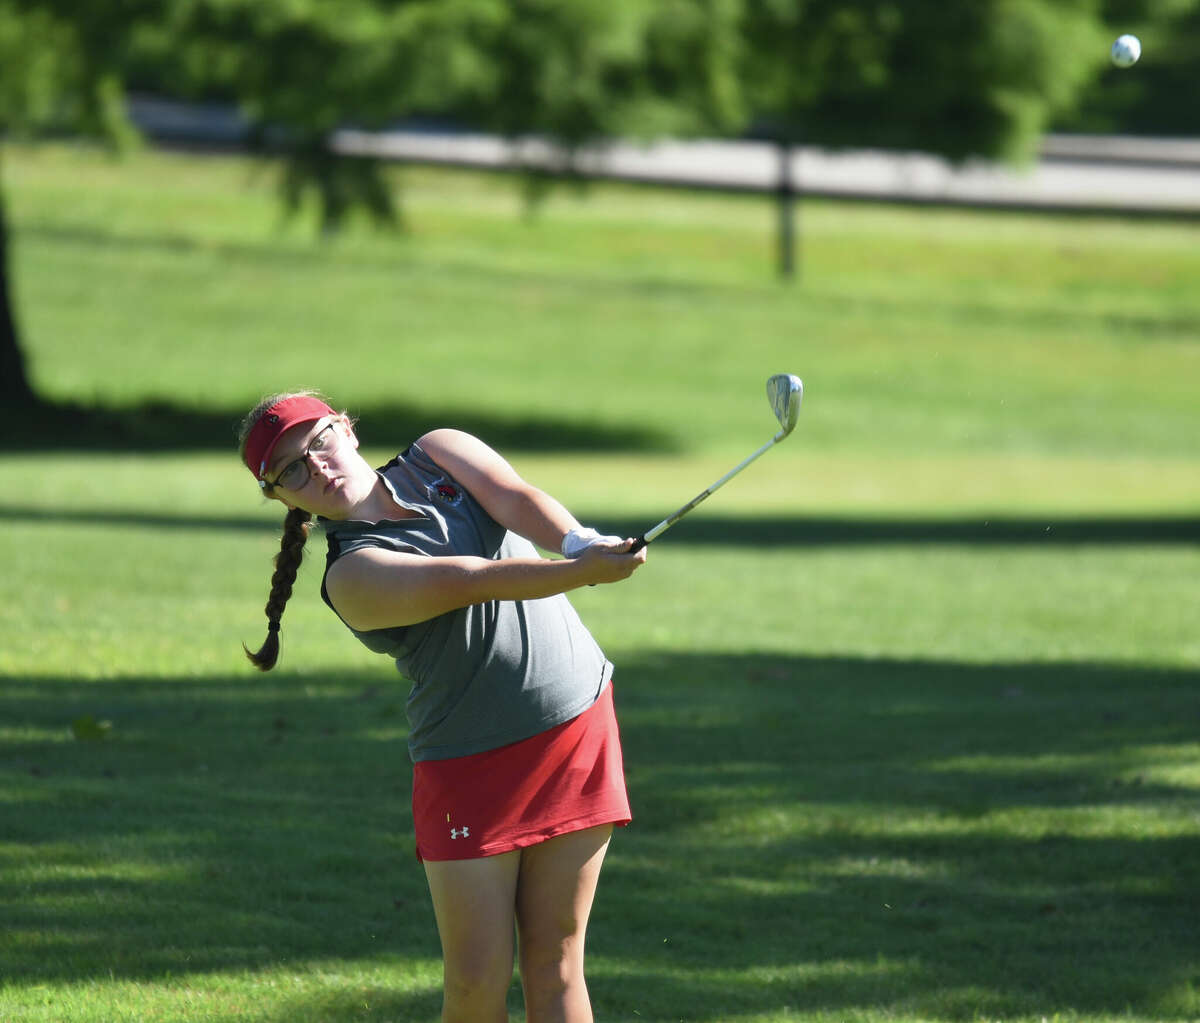 Alton's Addison Kenney hits a shot on hole No. 1 at Belk Park in the SWC Tournament on Tuesday in Wood River. Kenney is in eighth place in the 36-hole tourney after shooting 85.